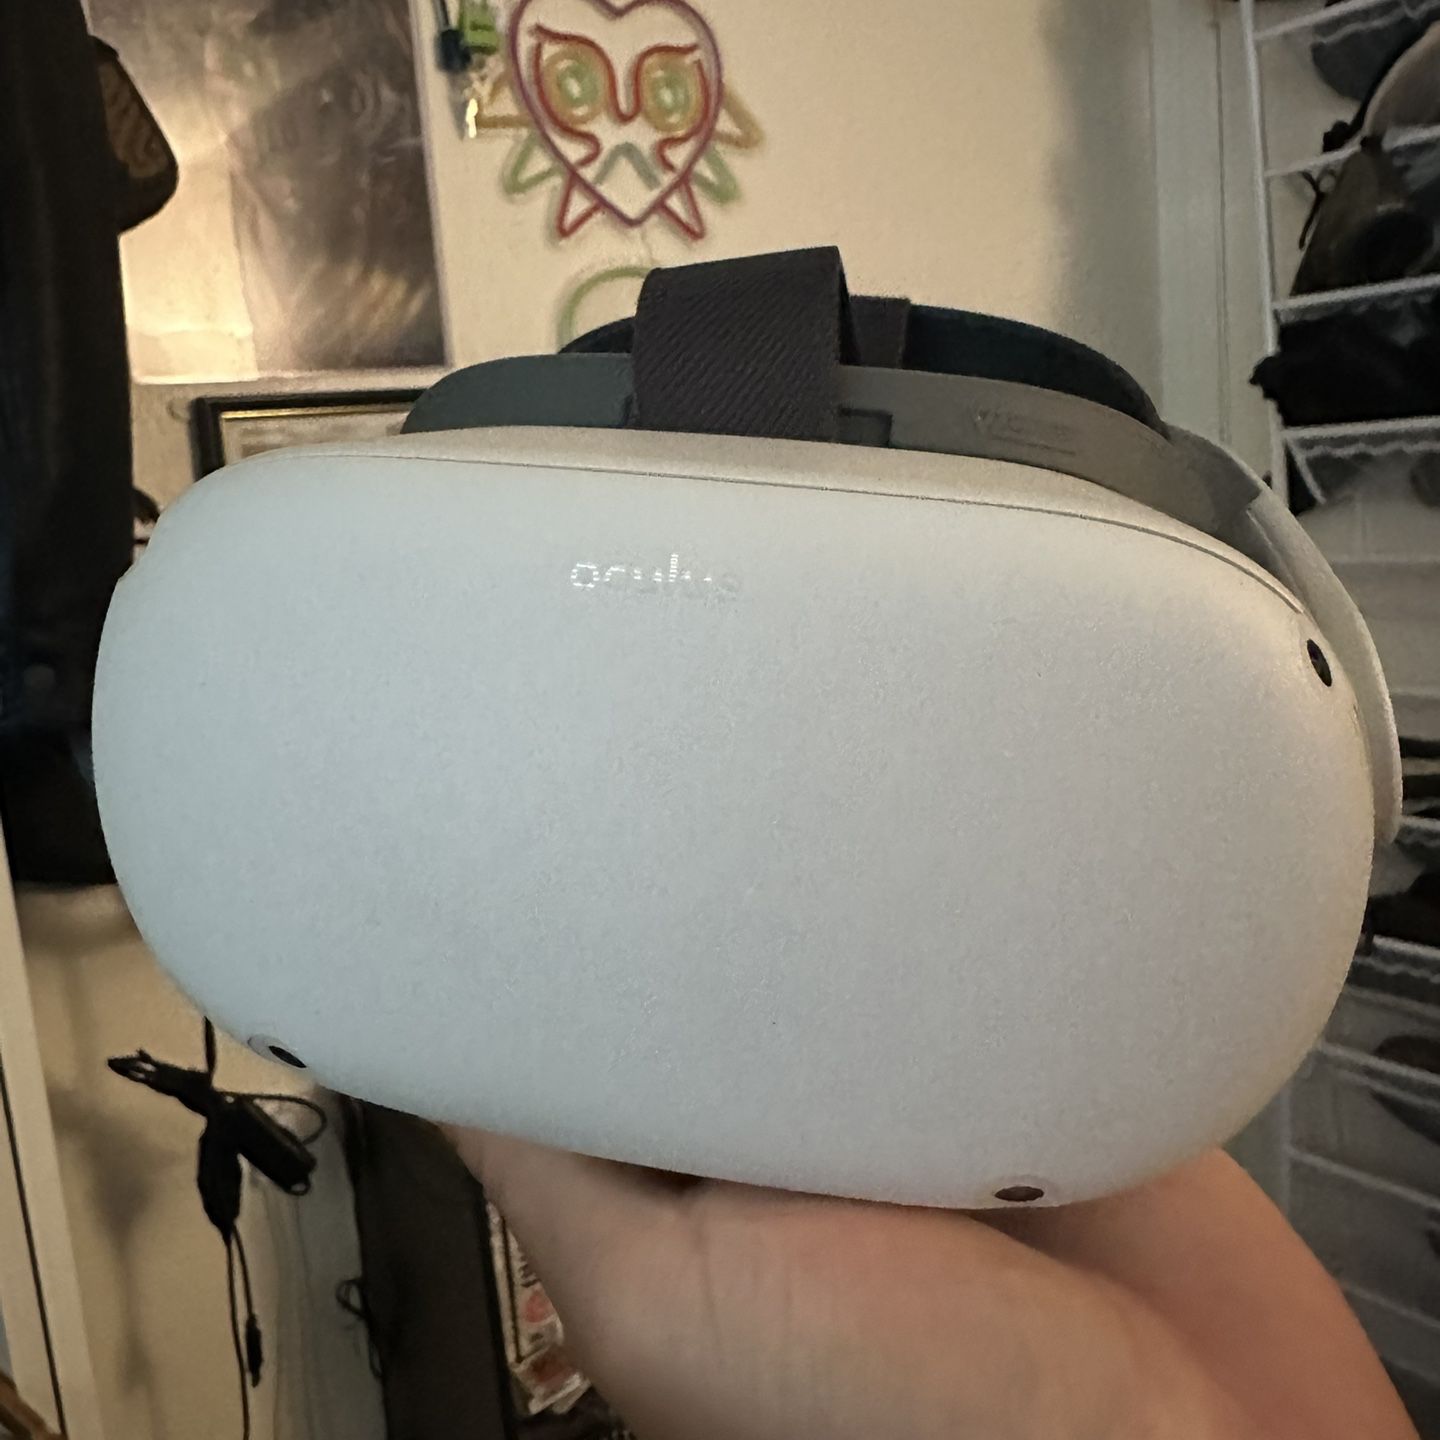 Meta Quest 2: All-In-One Wireless VR Headset - 256GB